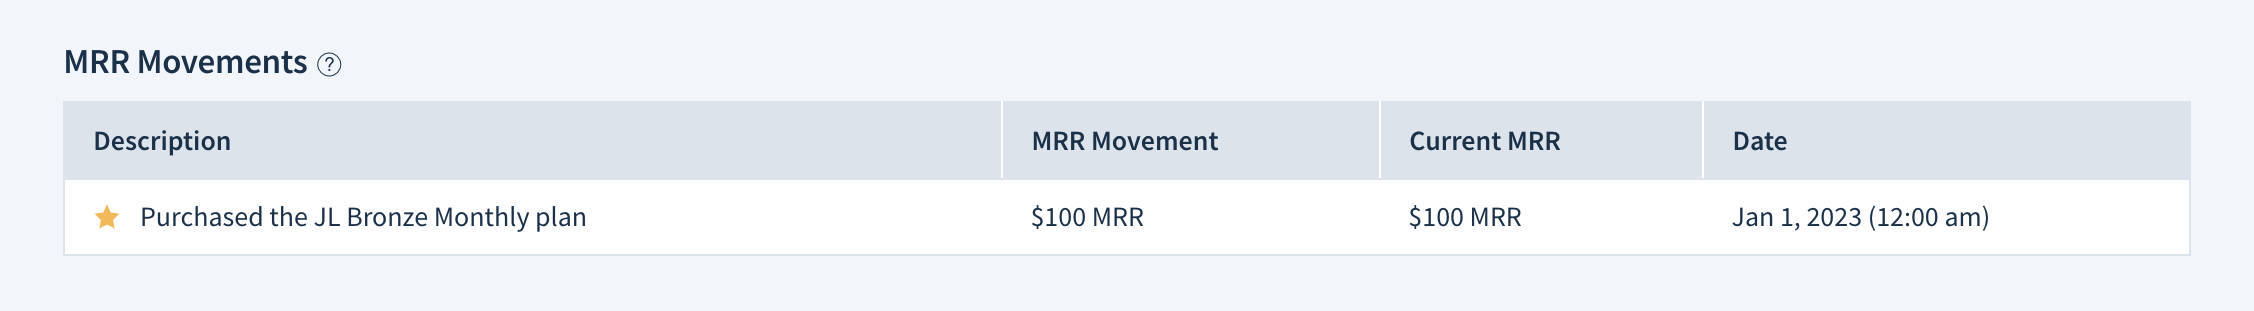 Screenshot of the MRR Movements table. It shows a new business movement of 100 dollars described as “Purchased the JL Bronze Monthly plan” on January 1st, 2023. Current MRR after this movement is 100 dollars.